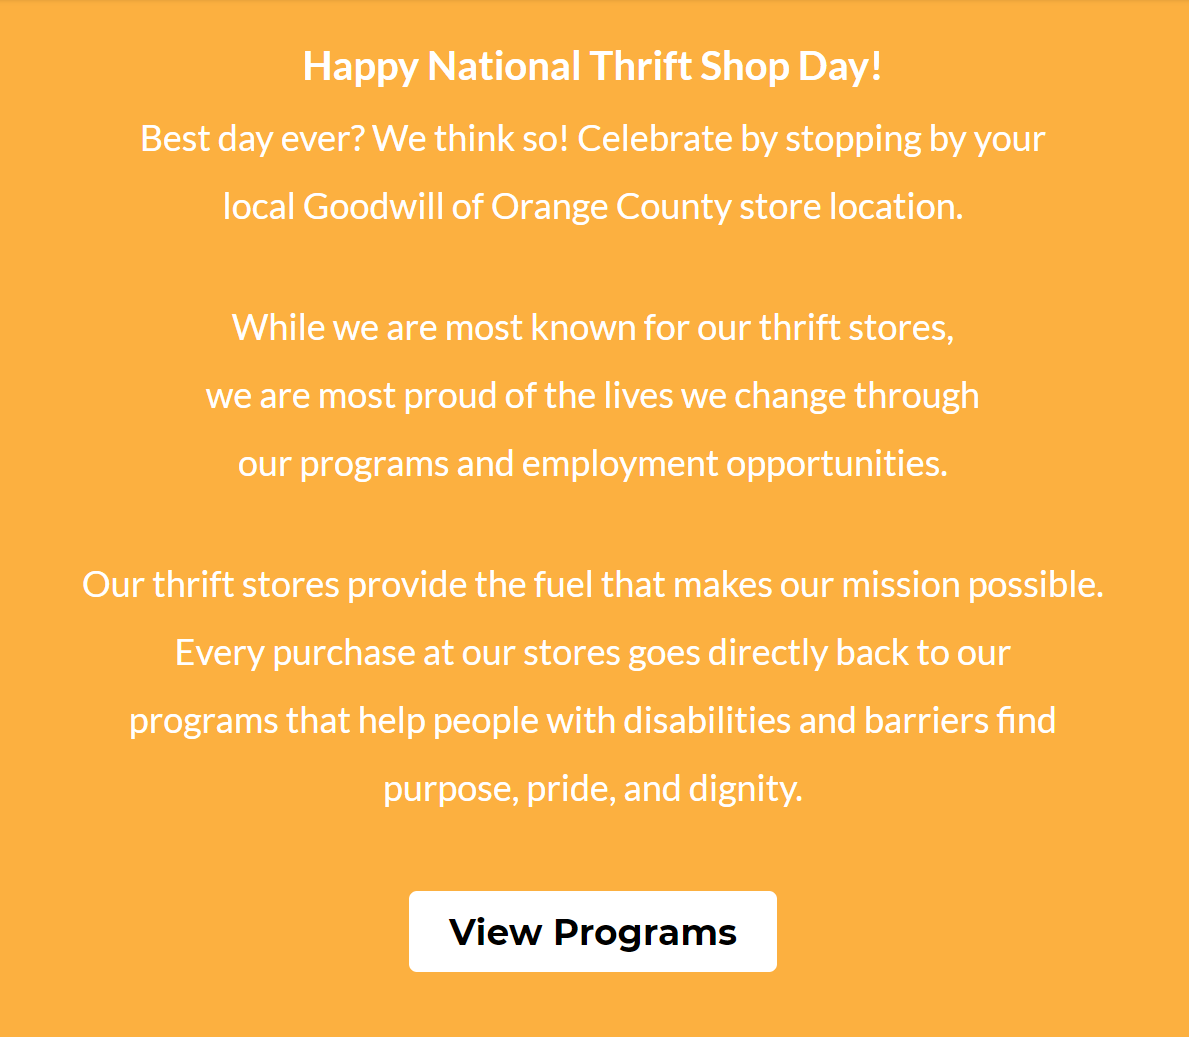 information on Happy thrift shop day 